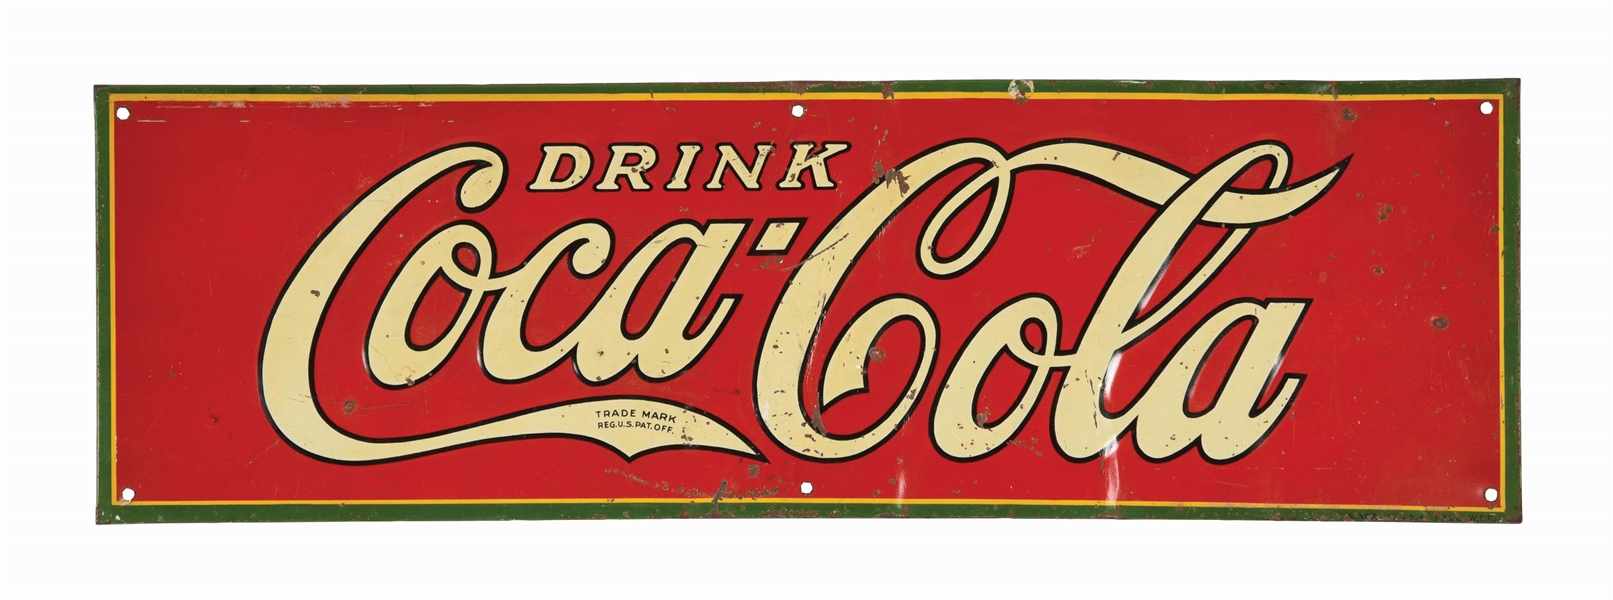 SINGLE-SIDED EMBOSSED "DRINK COCA-COLA" TIN SIGN.